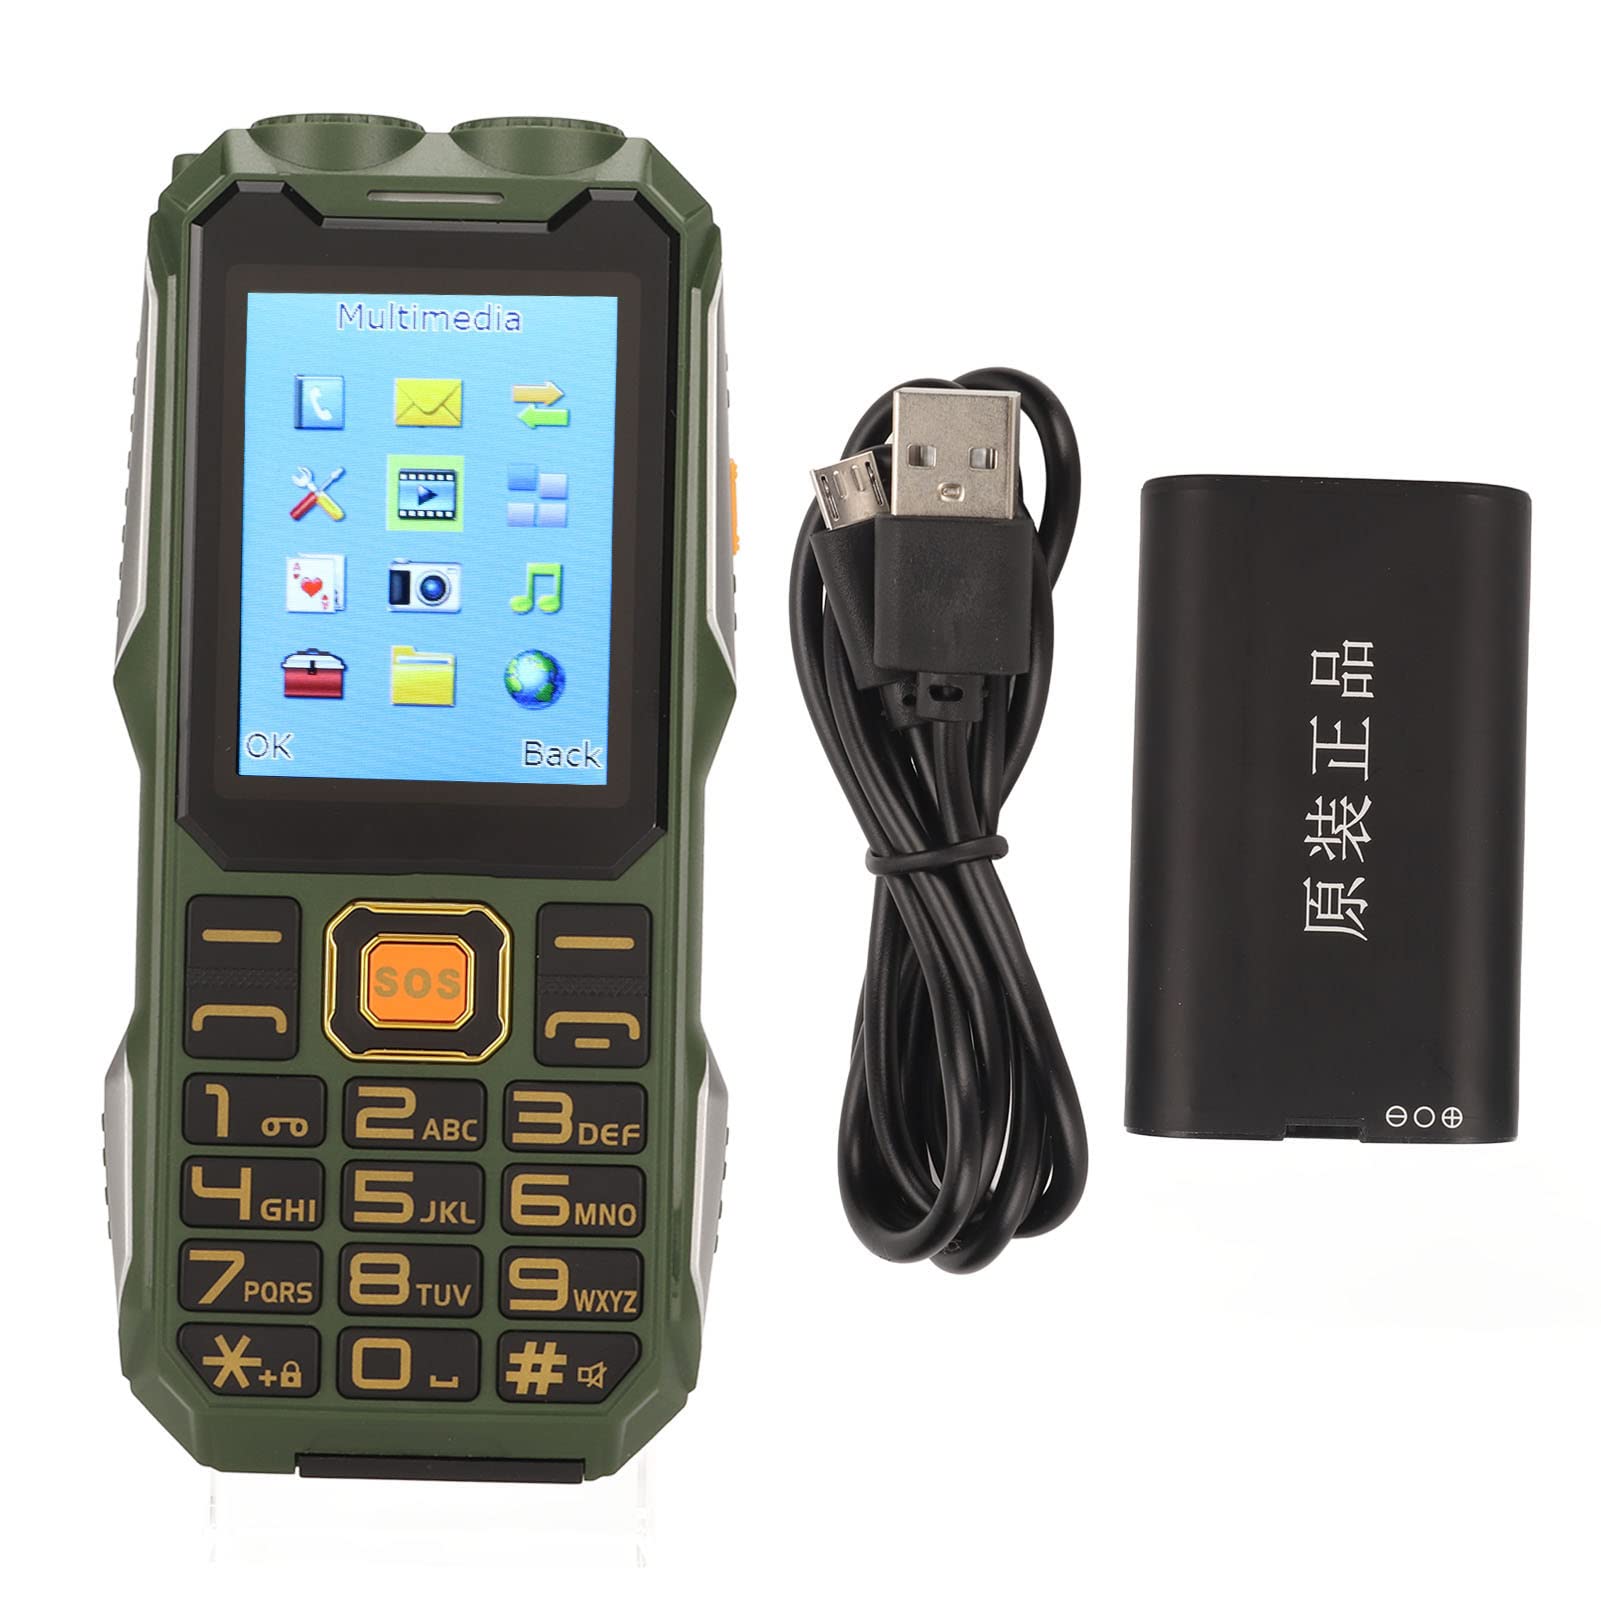 TUORE Large Button Elderly Mobile Phone, 1.3MP ABS Senior Mobile Phone SOS Function 2G Calculator for Outdoor (Green)